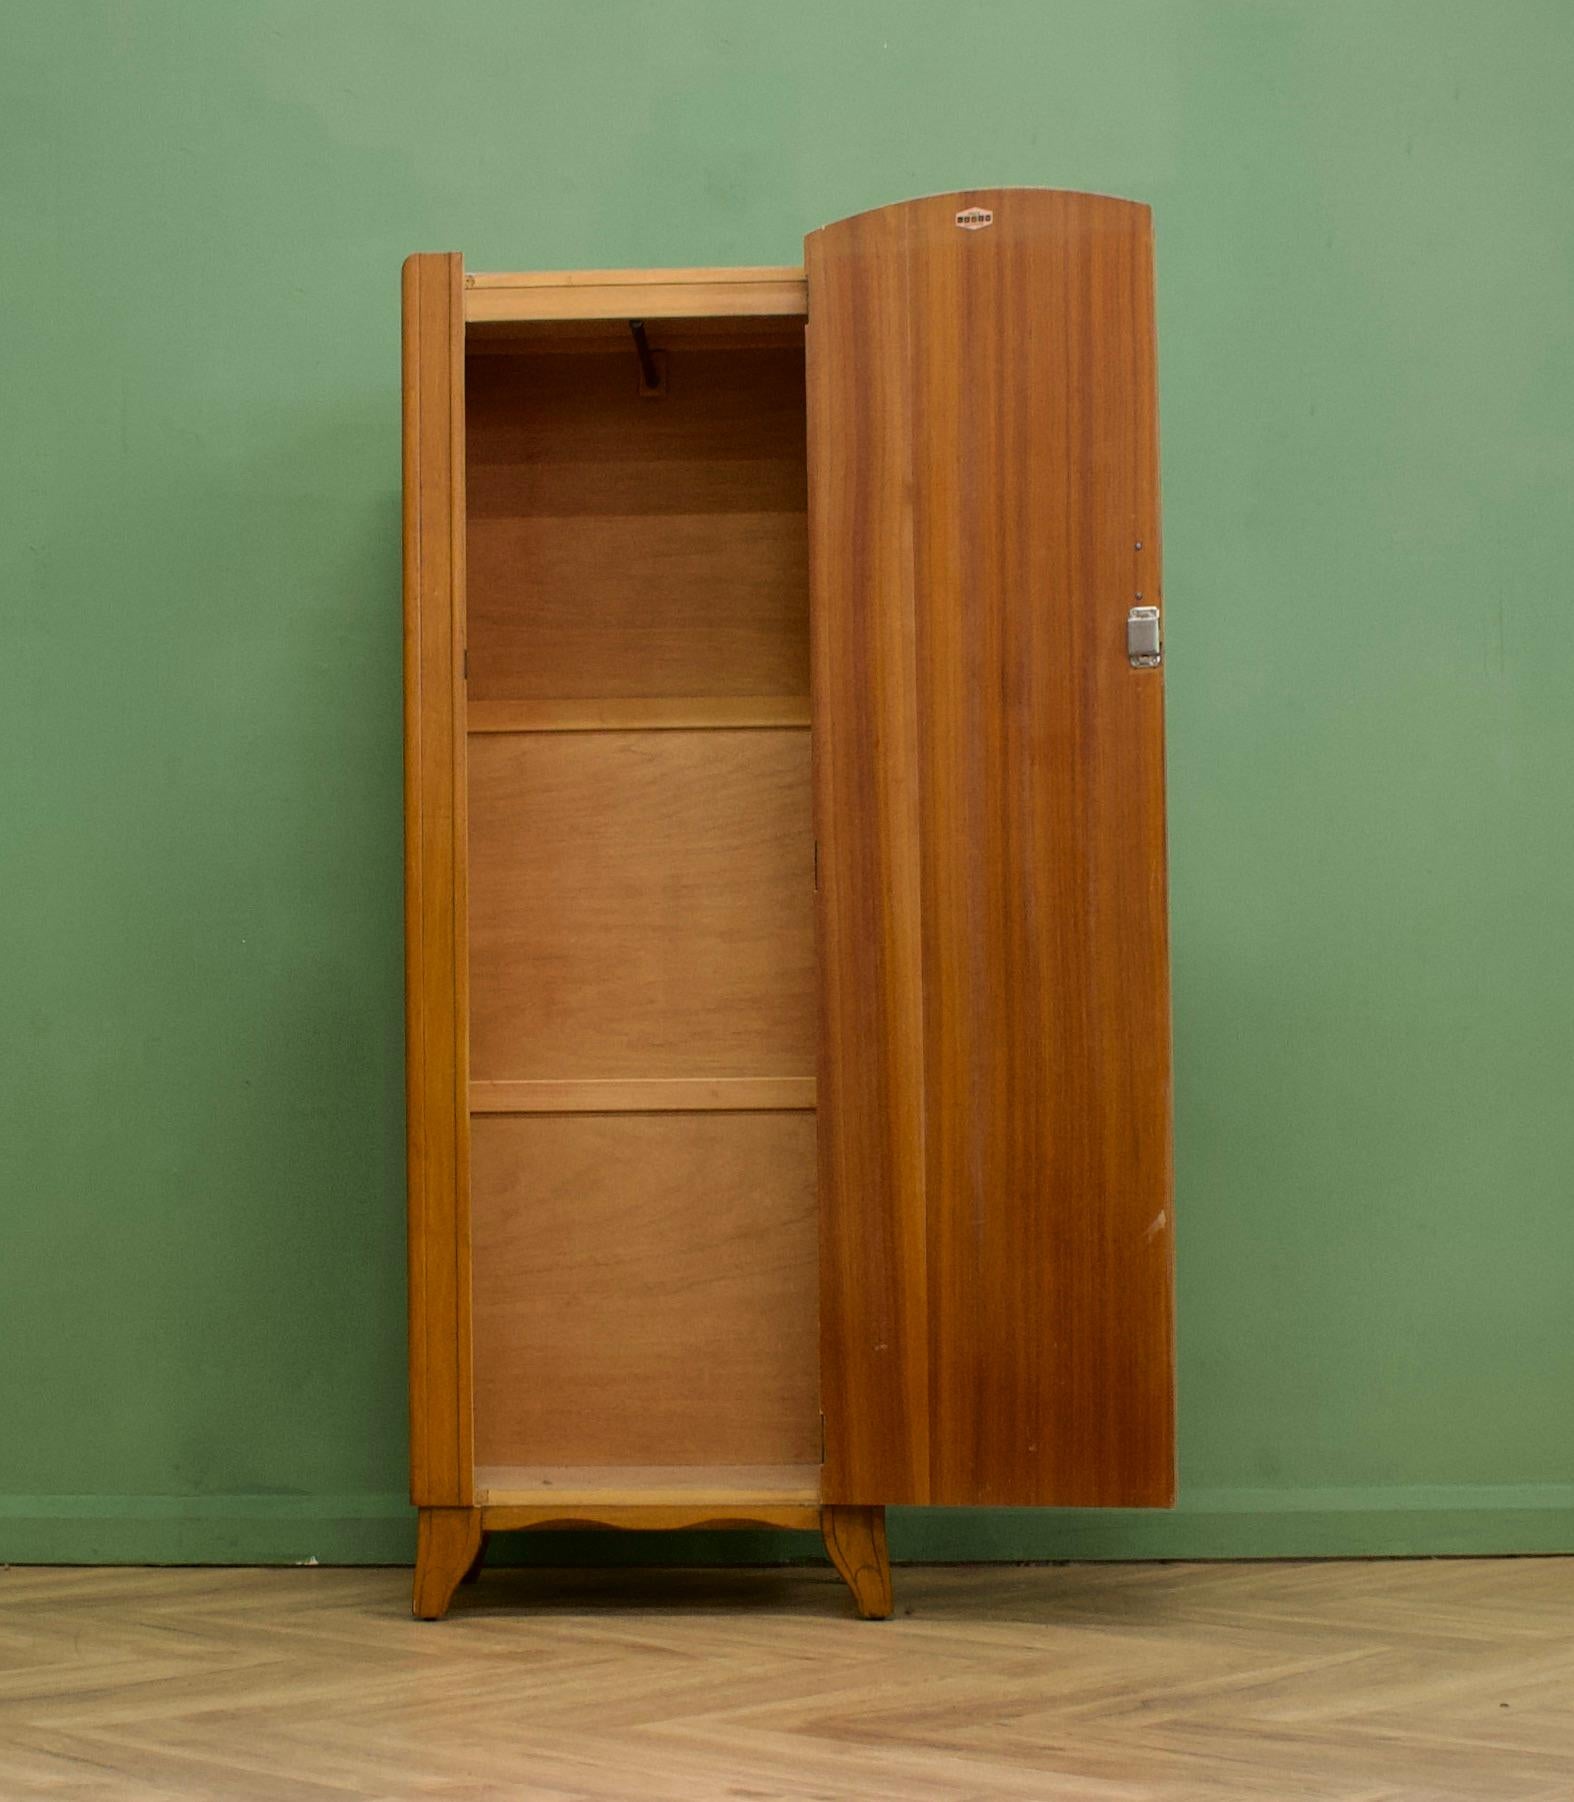 British Vintage Art Deco Style Oak Wardrobe from Lebus, 1950s In Good Condition For Sale In South Shields, GB